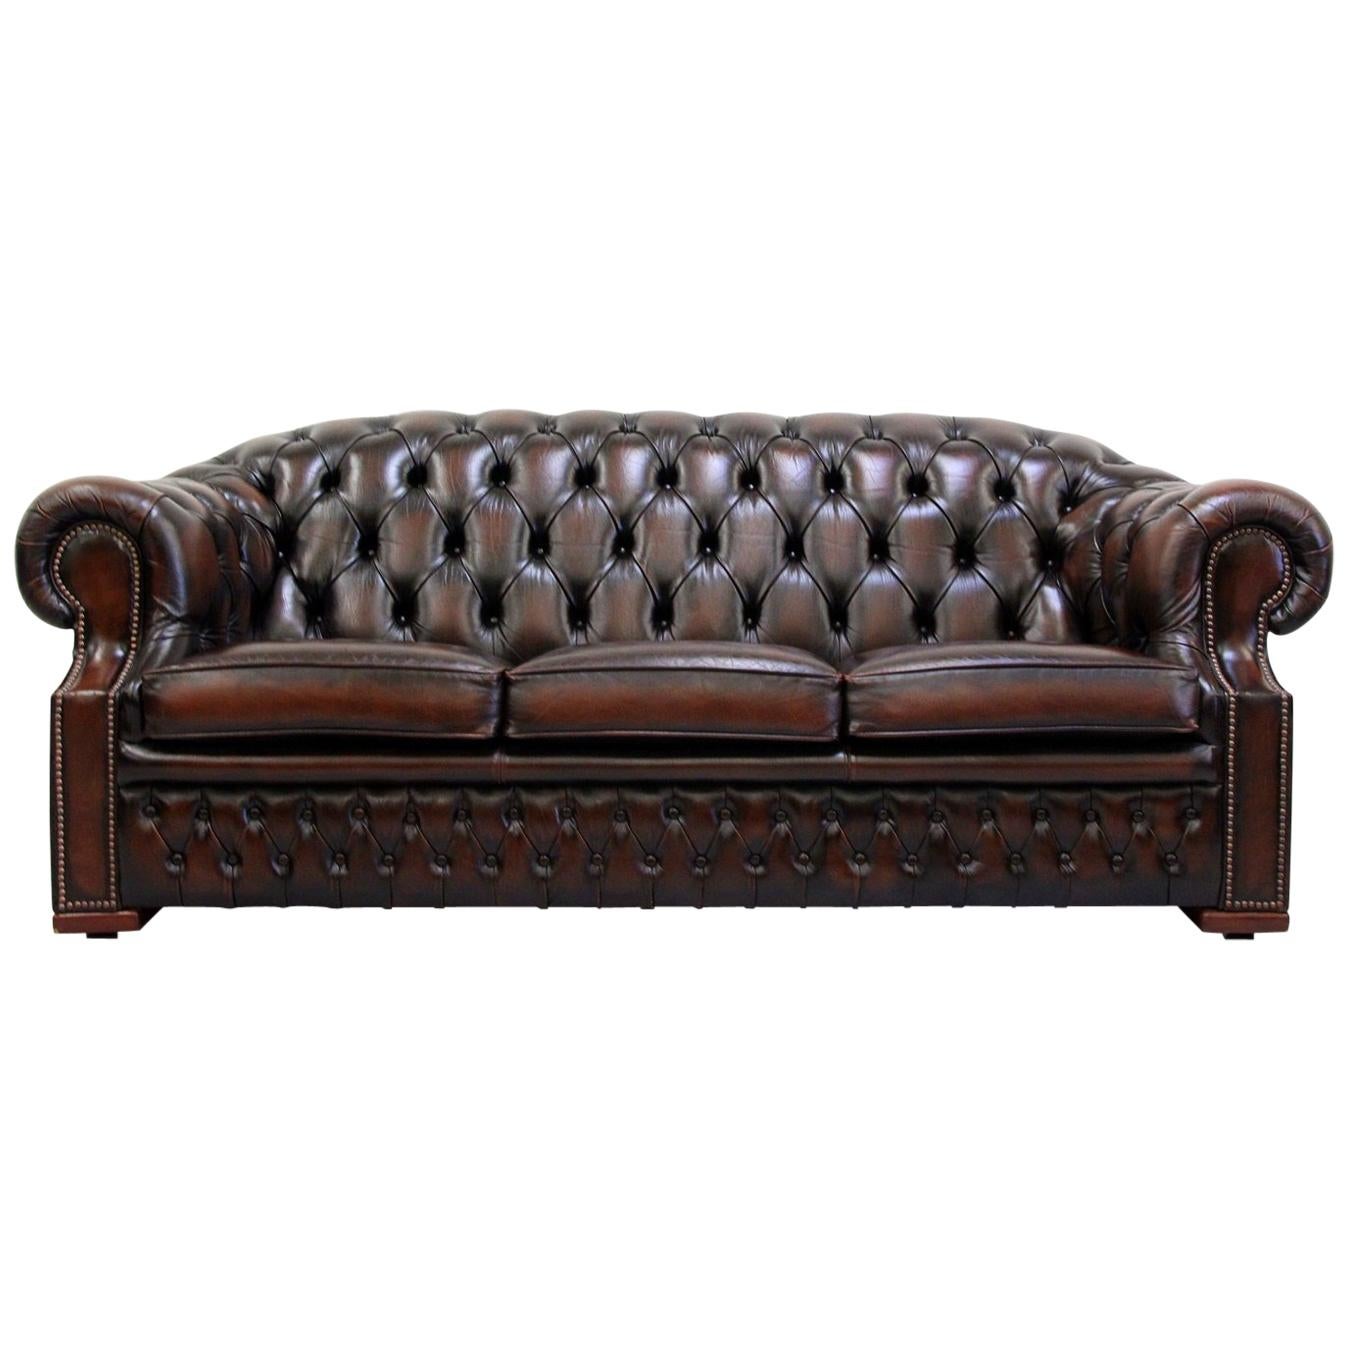 Chesterfield Centurion Sofa Leather Antique Vintage Couch English For Sale